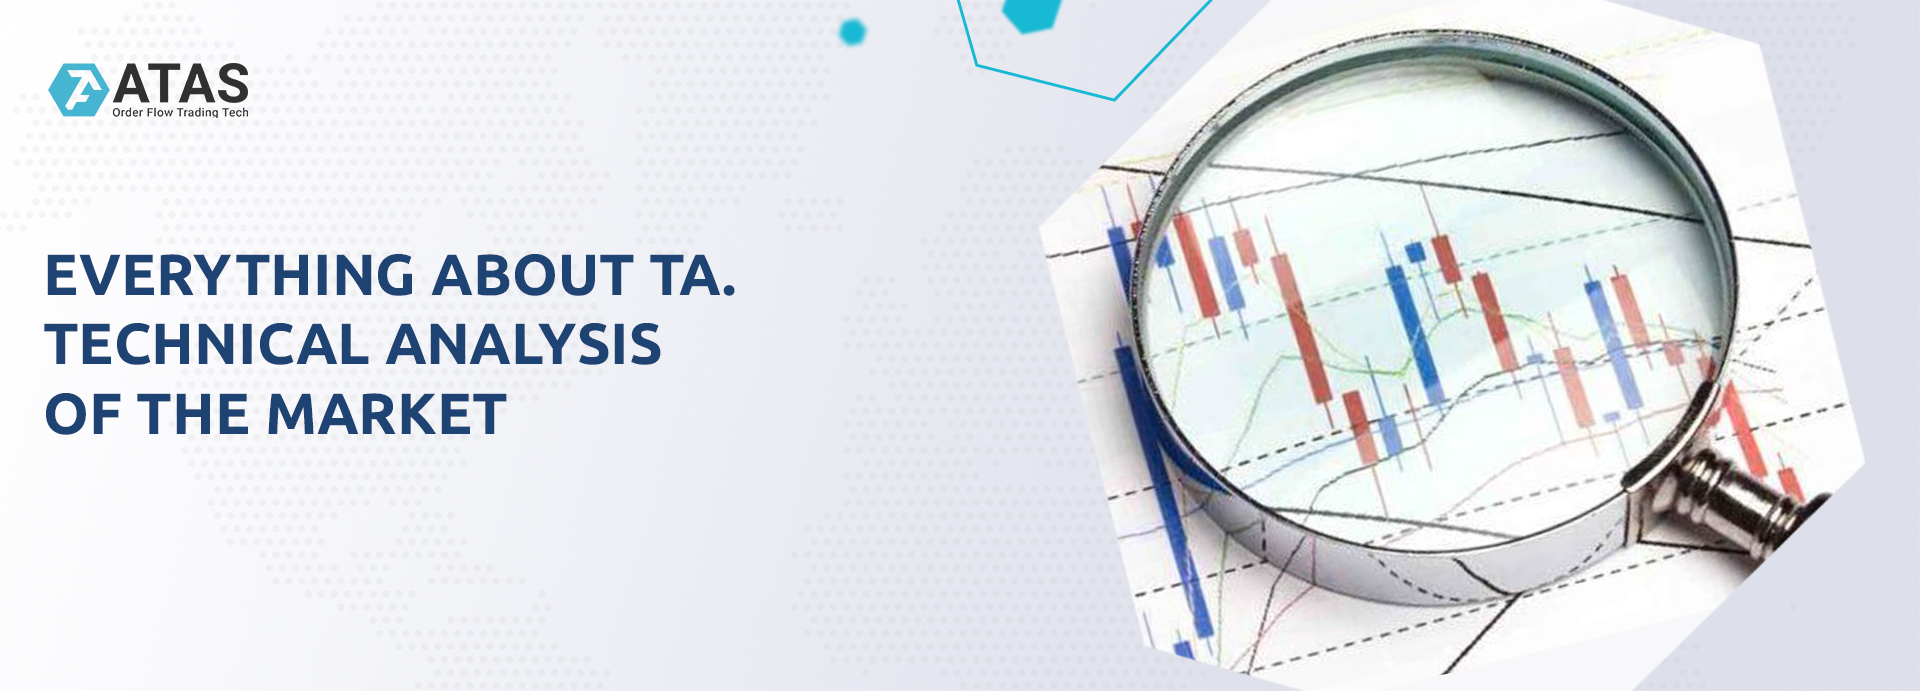 Everything about TA. Technical analysis of the market